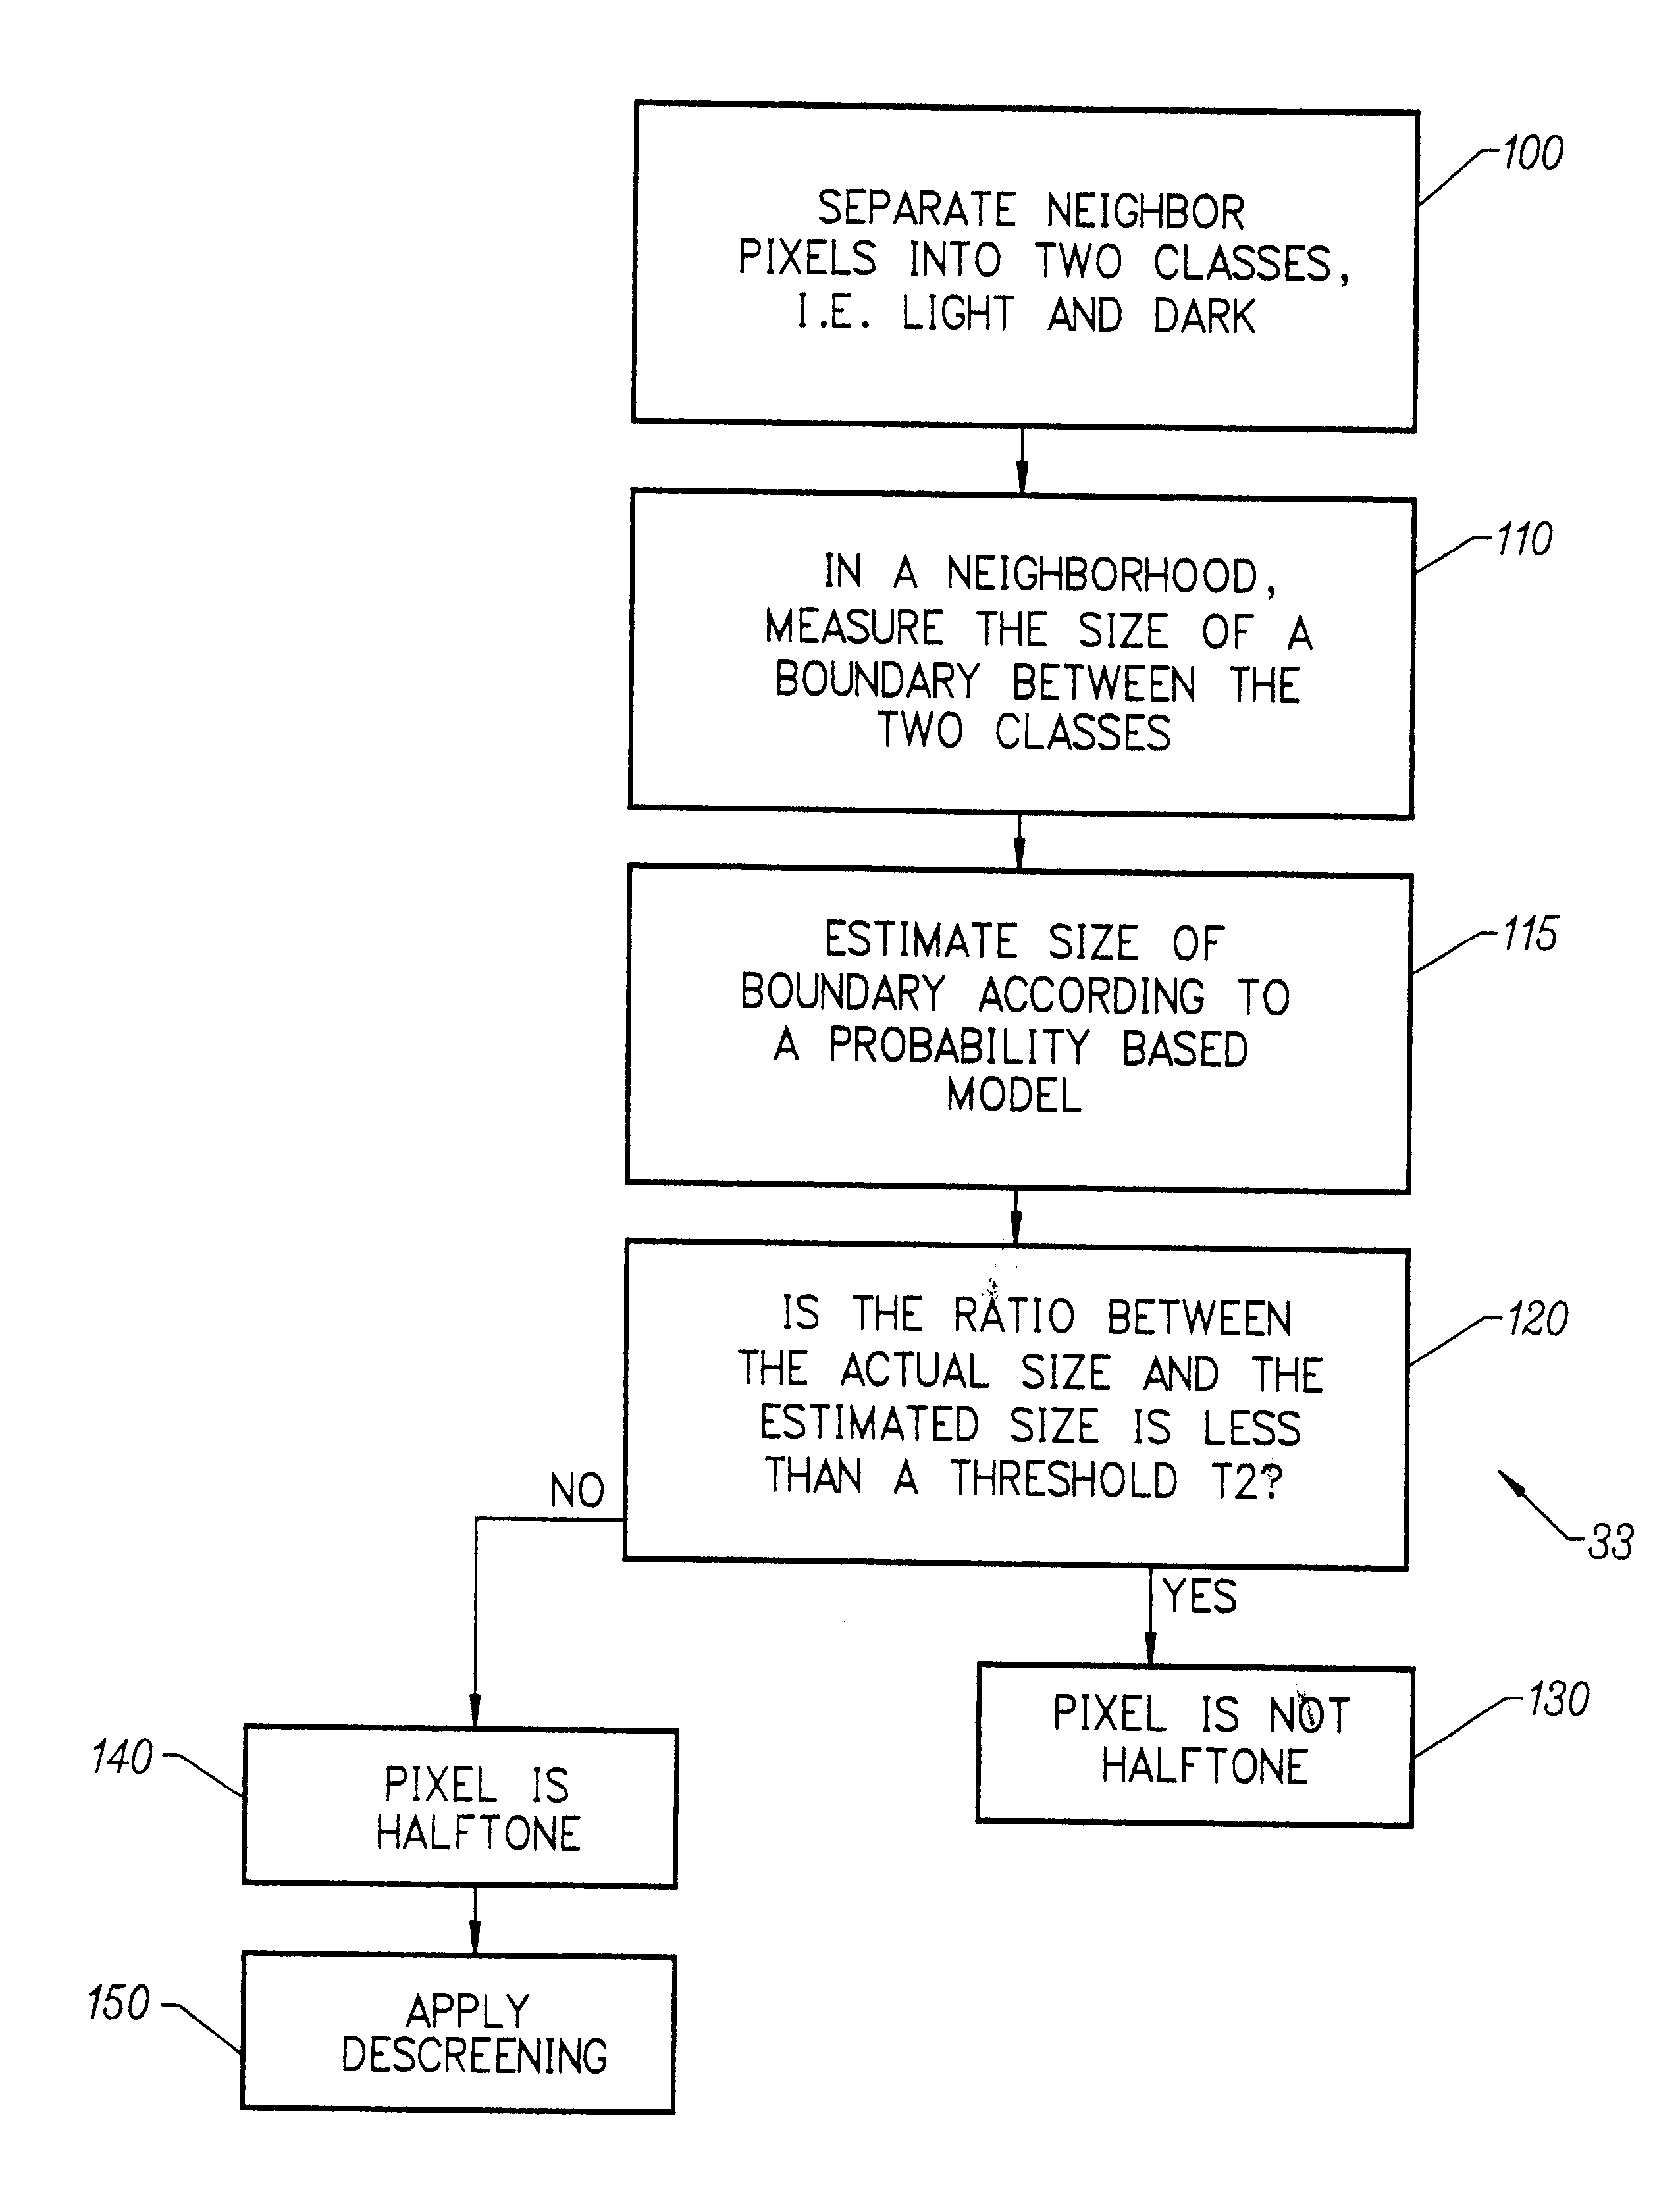 Method and apparatus for image classification and halftone detection